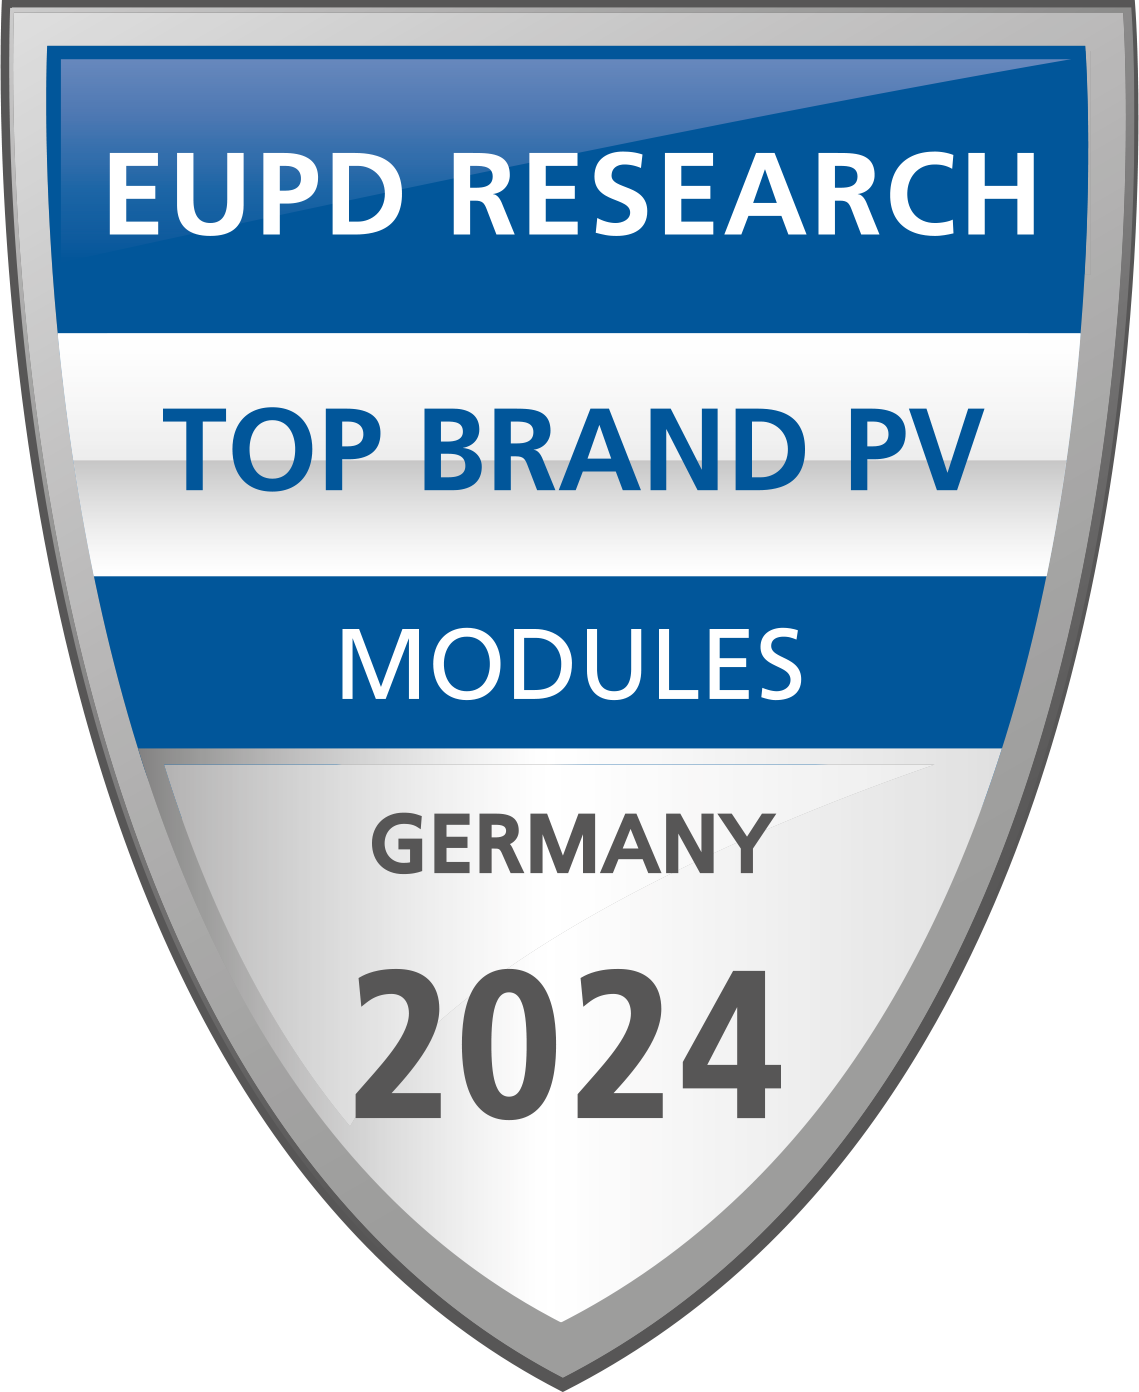 EUPD TOP BRAND PV - modules 2024 - Germany